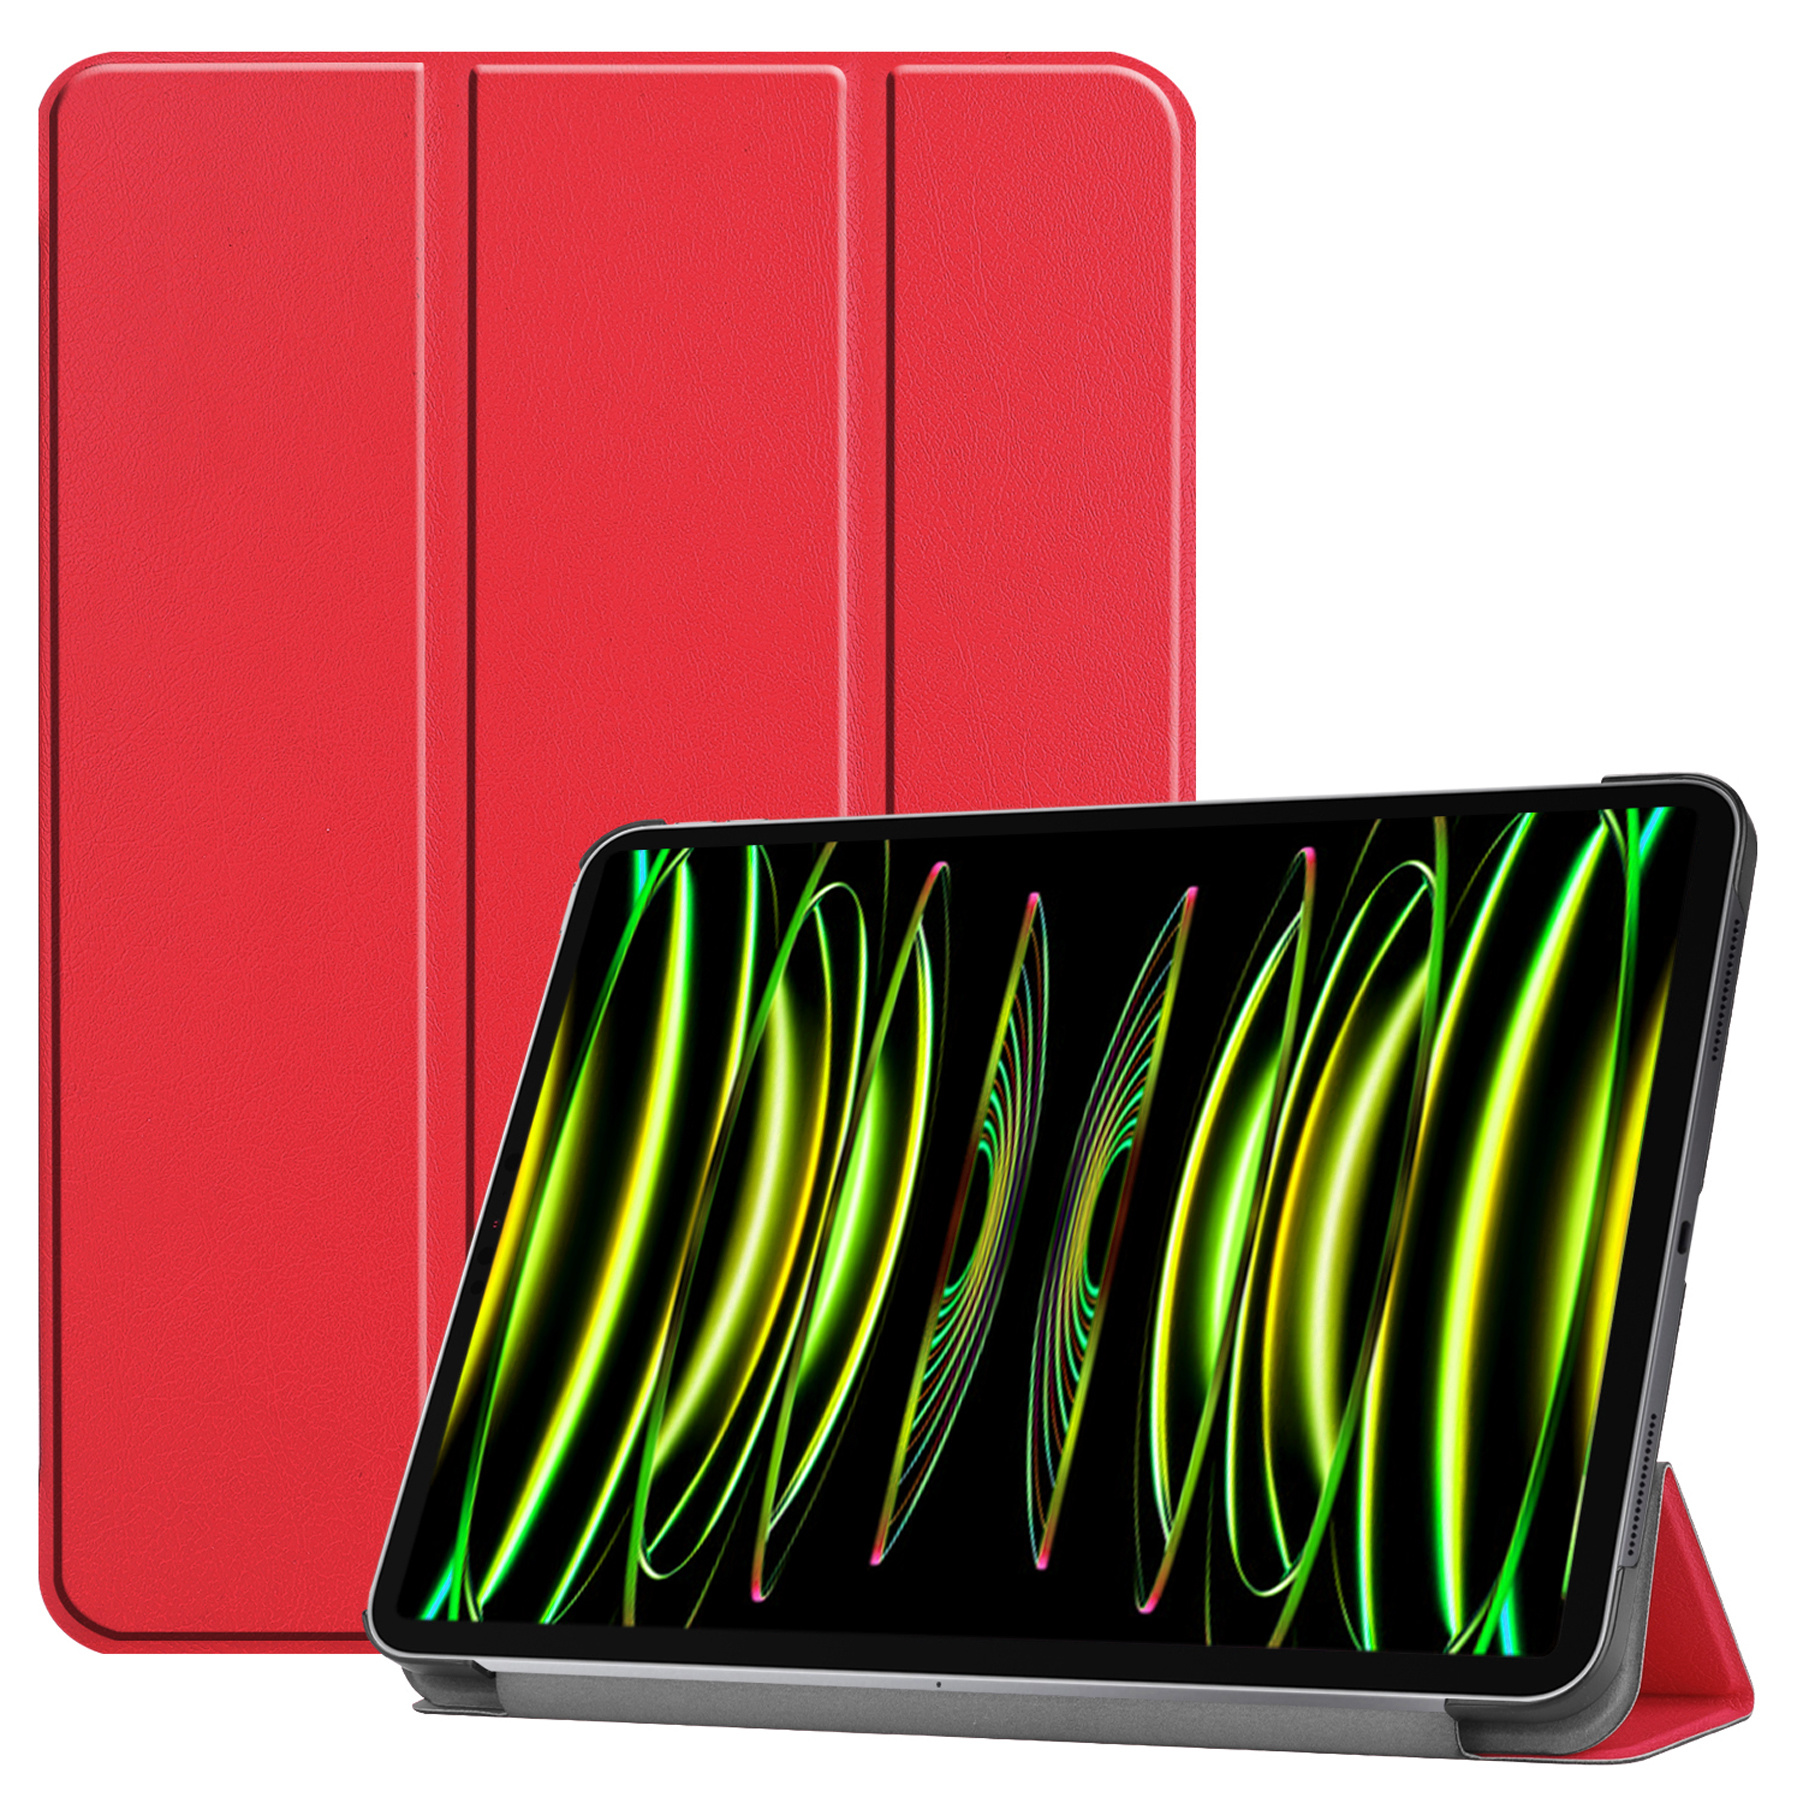 Nomfy Nomfy iPad Pro 11 inch (2022) Hoesje - Rood